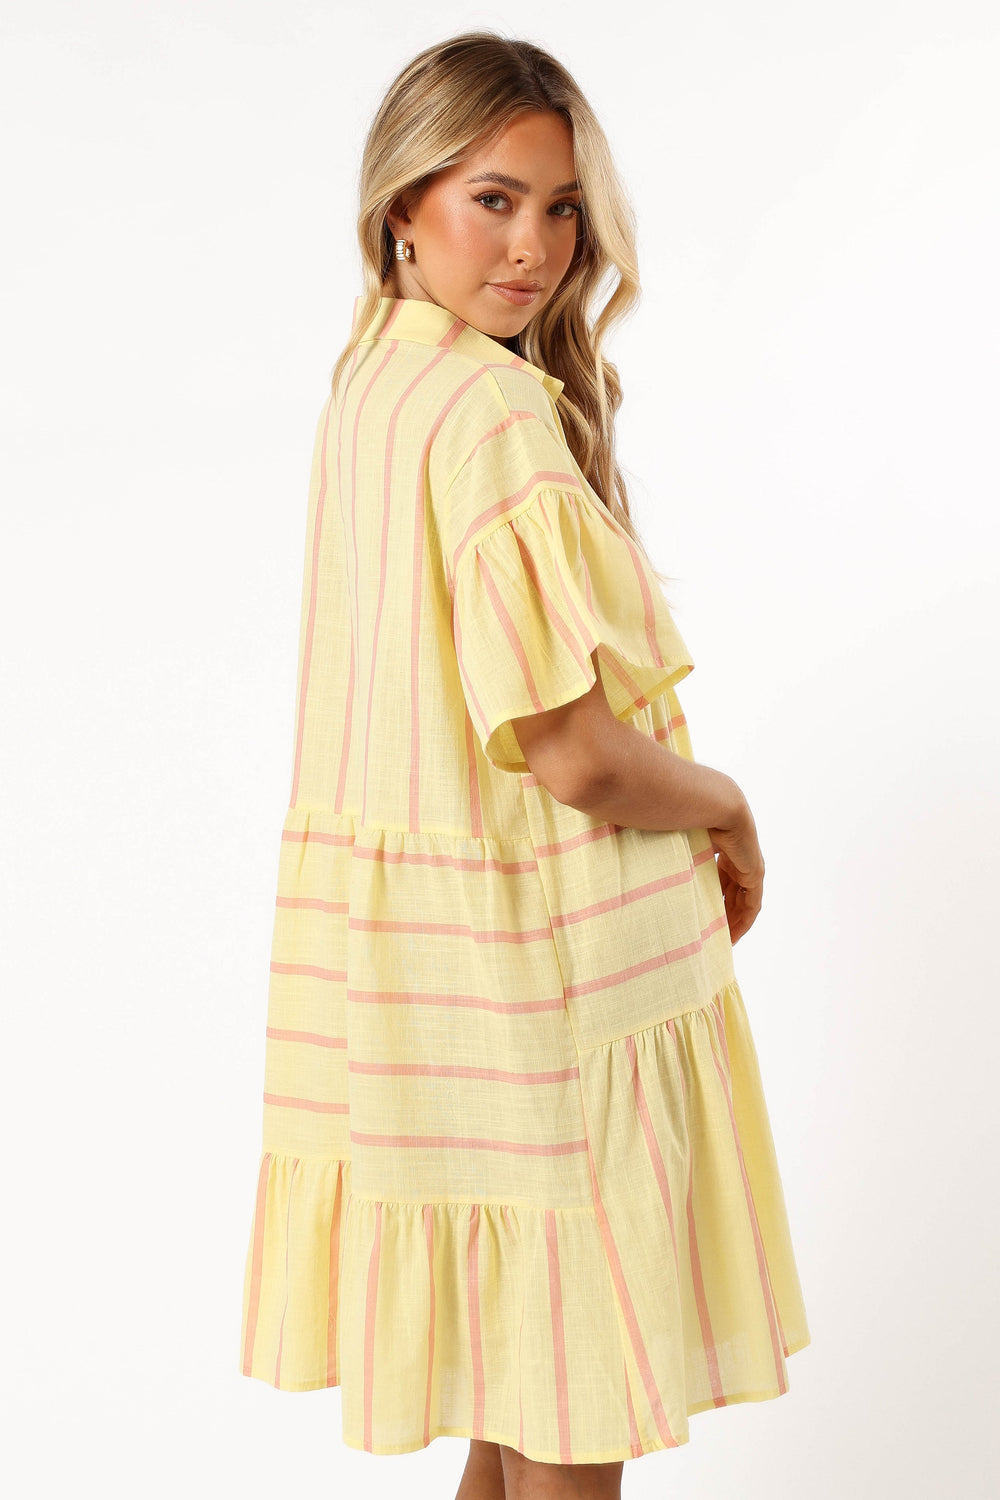 DRESSES @Peachy Mini Dress - Yellow Pink Stripe (Hold for Transitional Essentials)